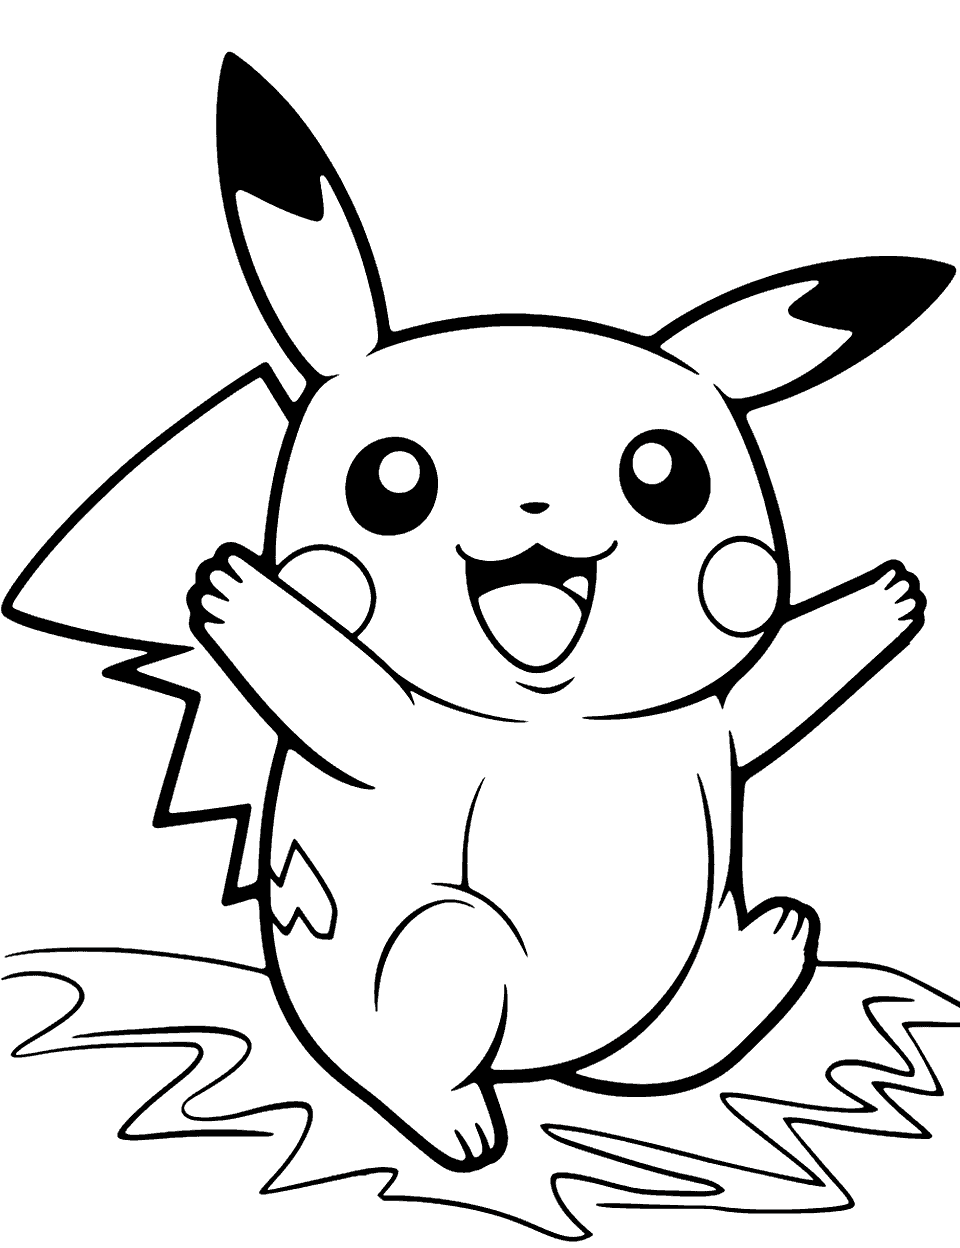 Pikachu's Day Out Coloring Page - Pikachu jumping ready to unleash his power.